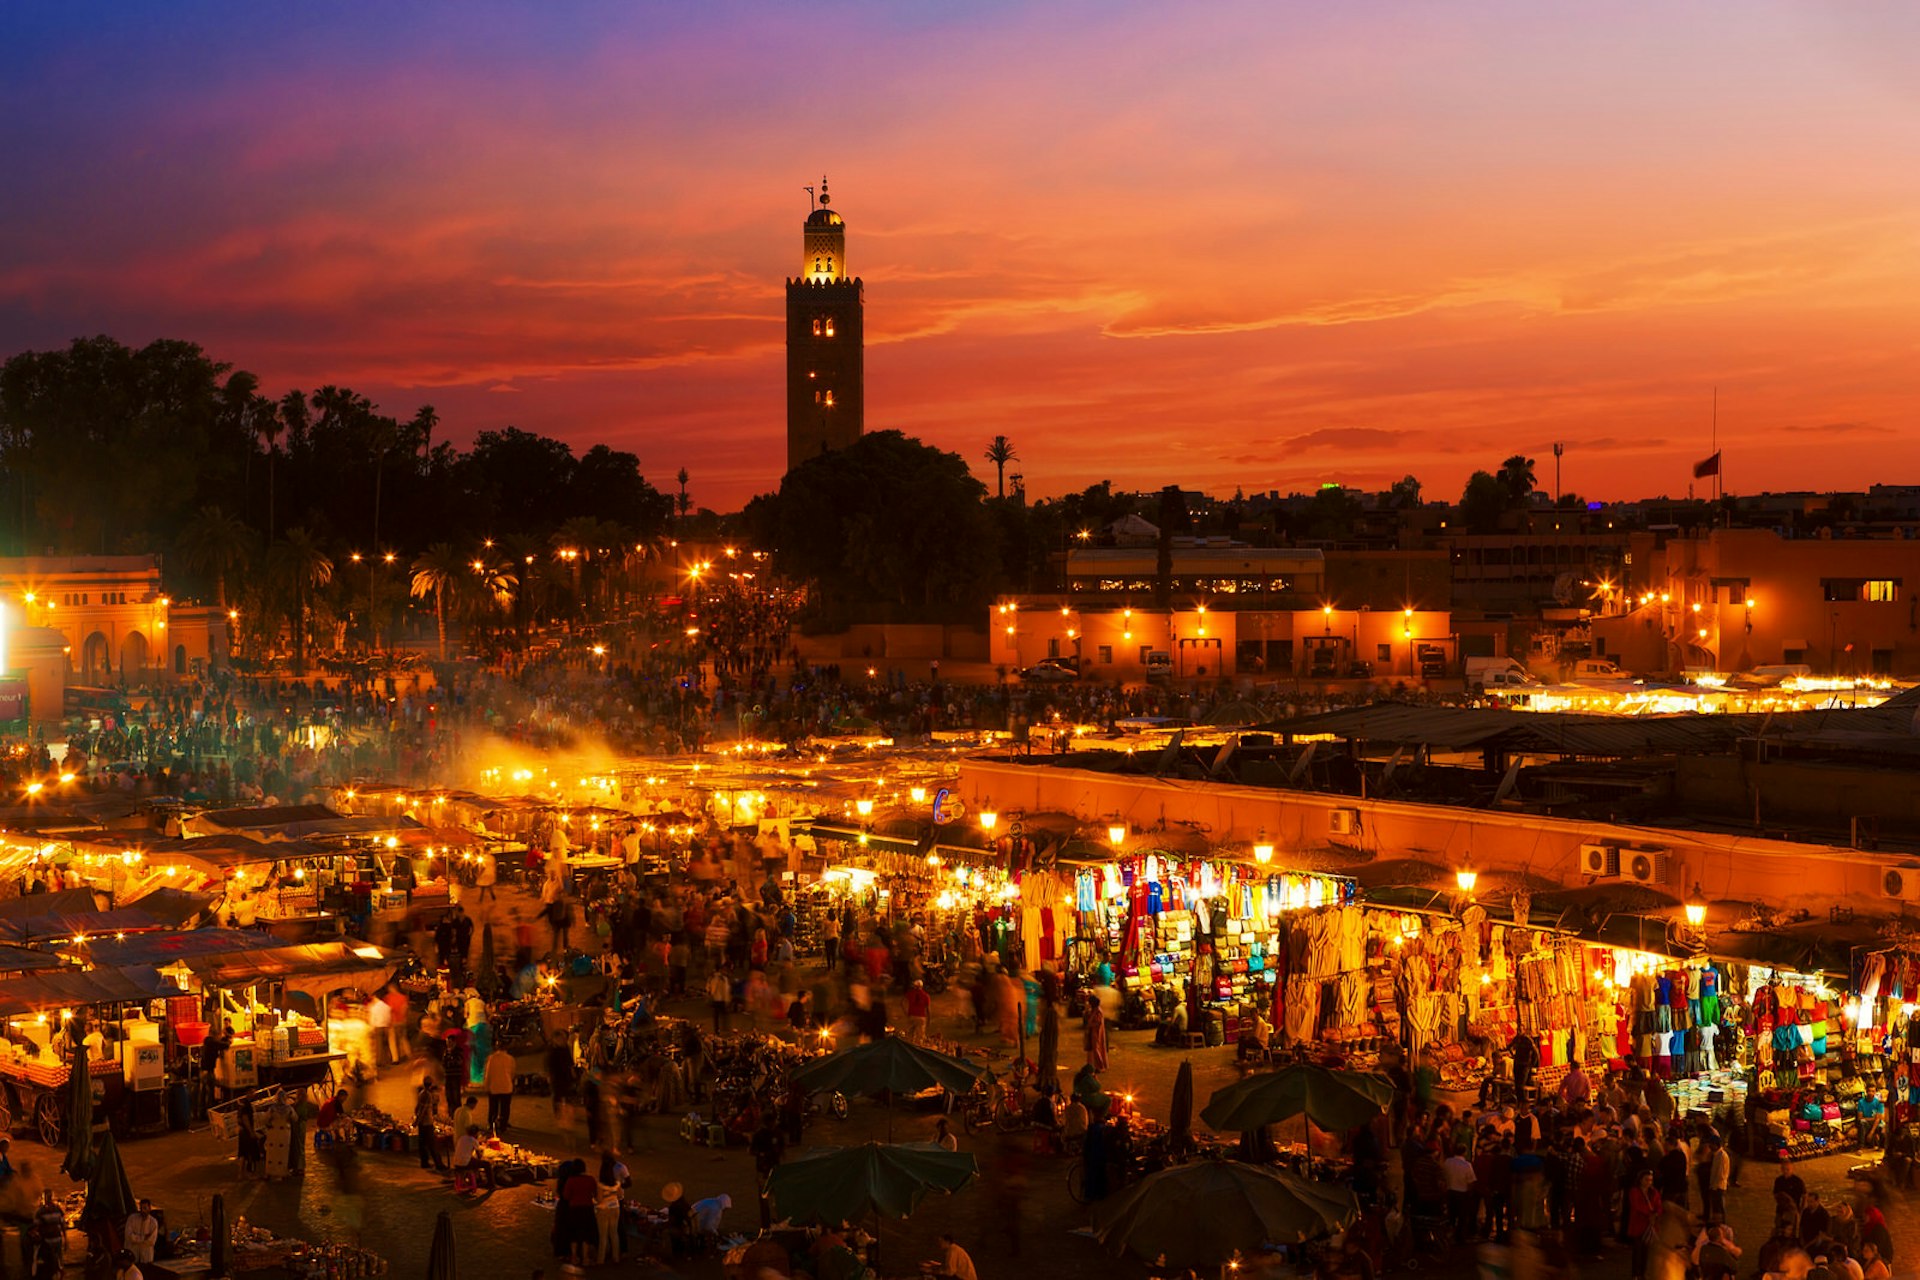 Sunset over the popular Djemaa El Fna Square in Marrakesh, Morocco